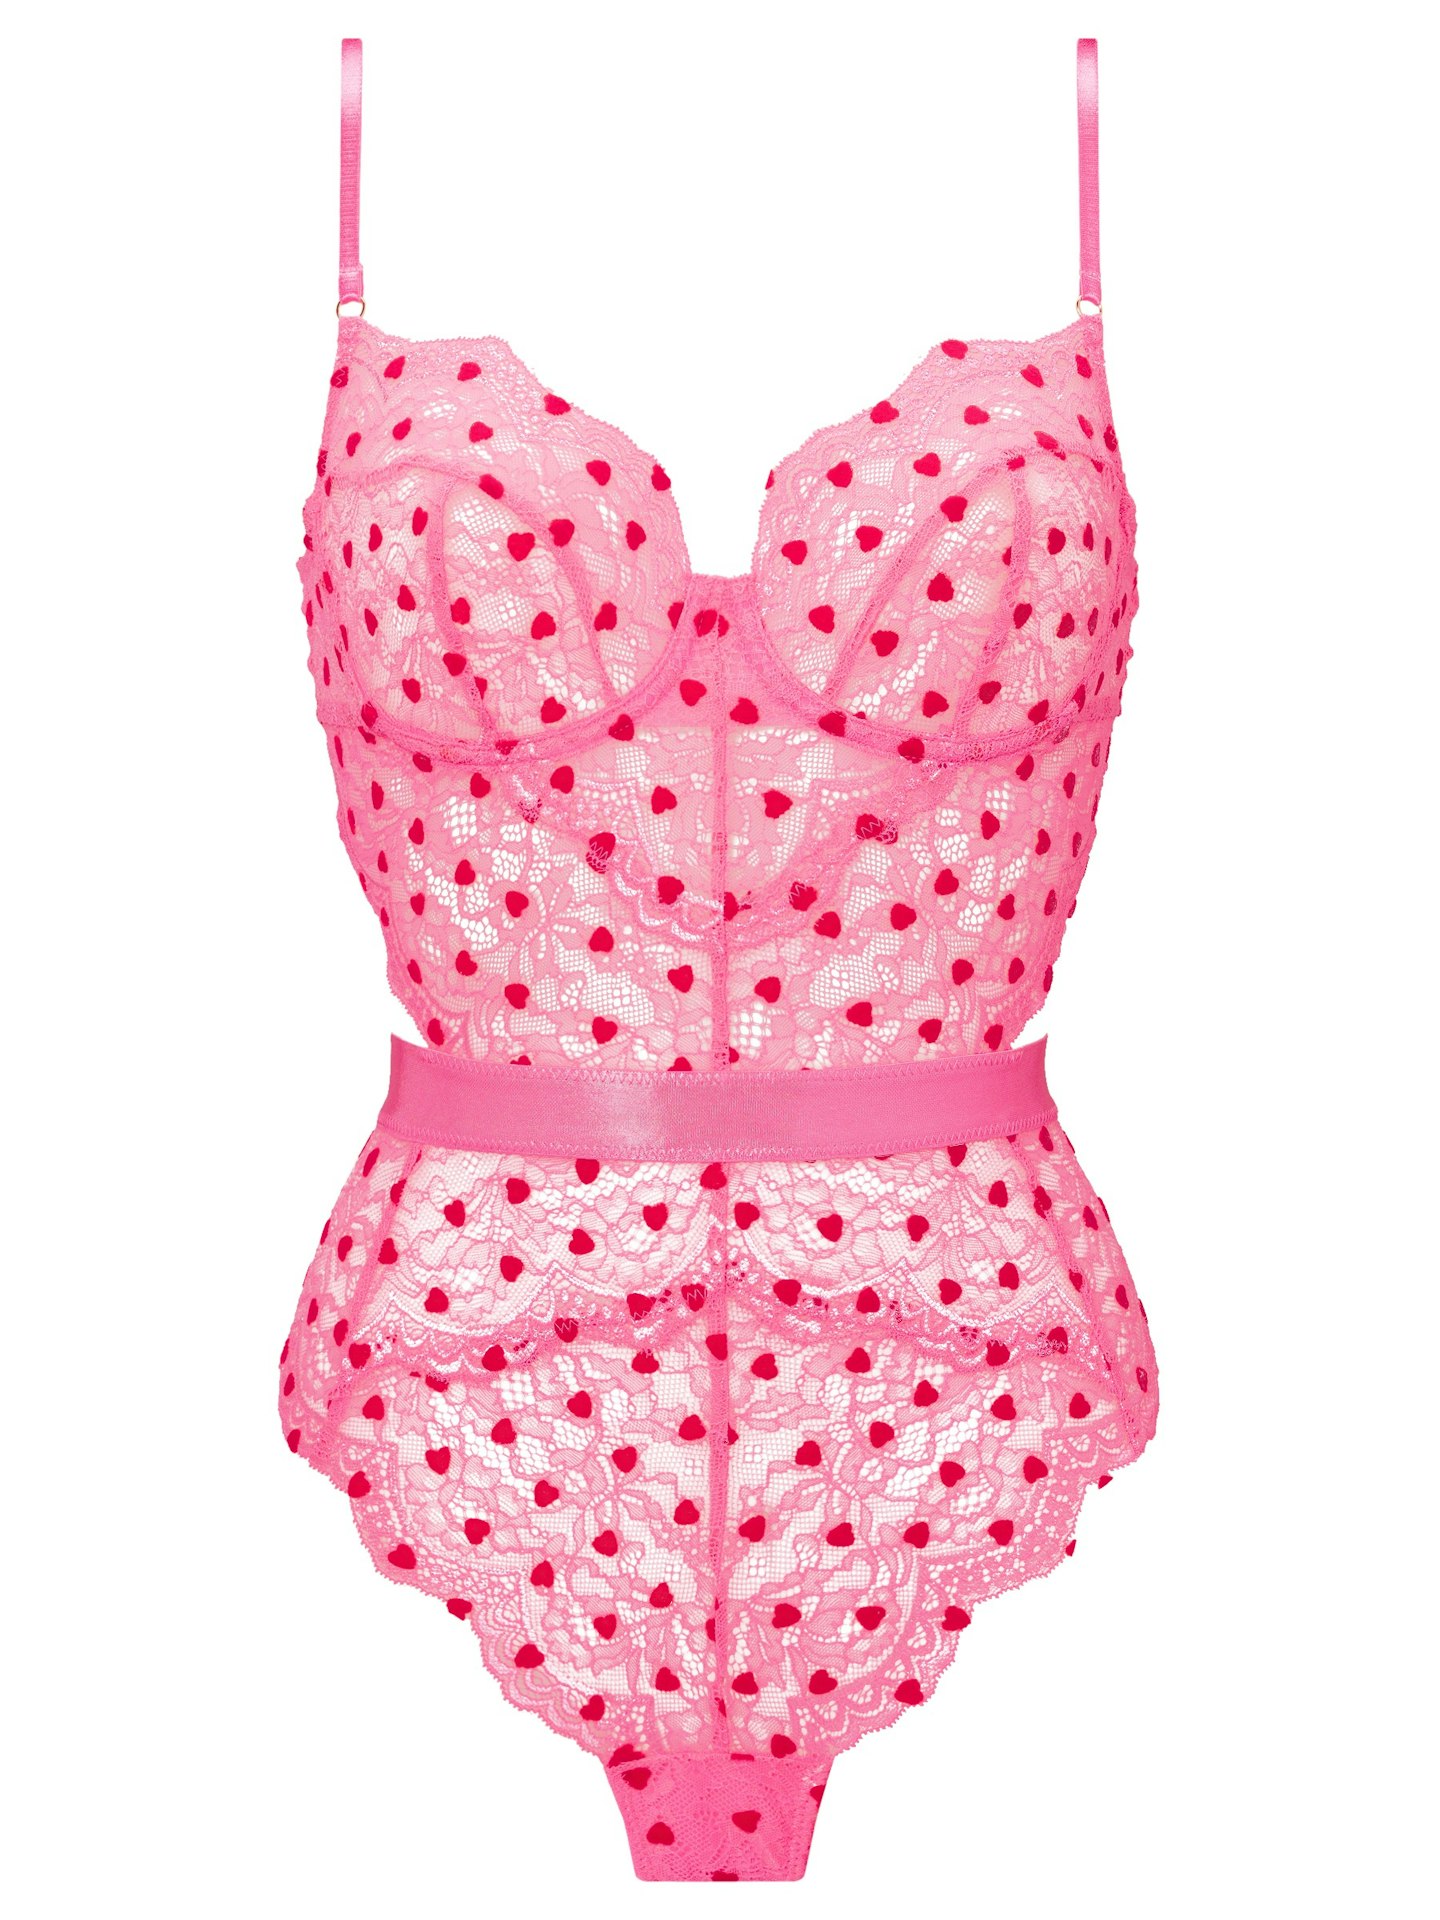 Ann Summers Pink and red heart print lace bodysuit